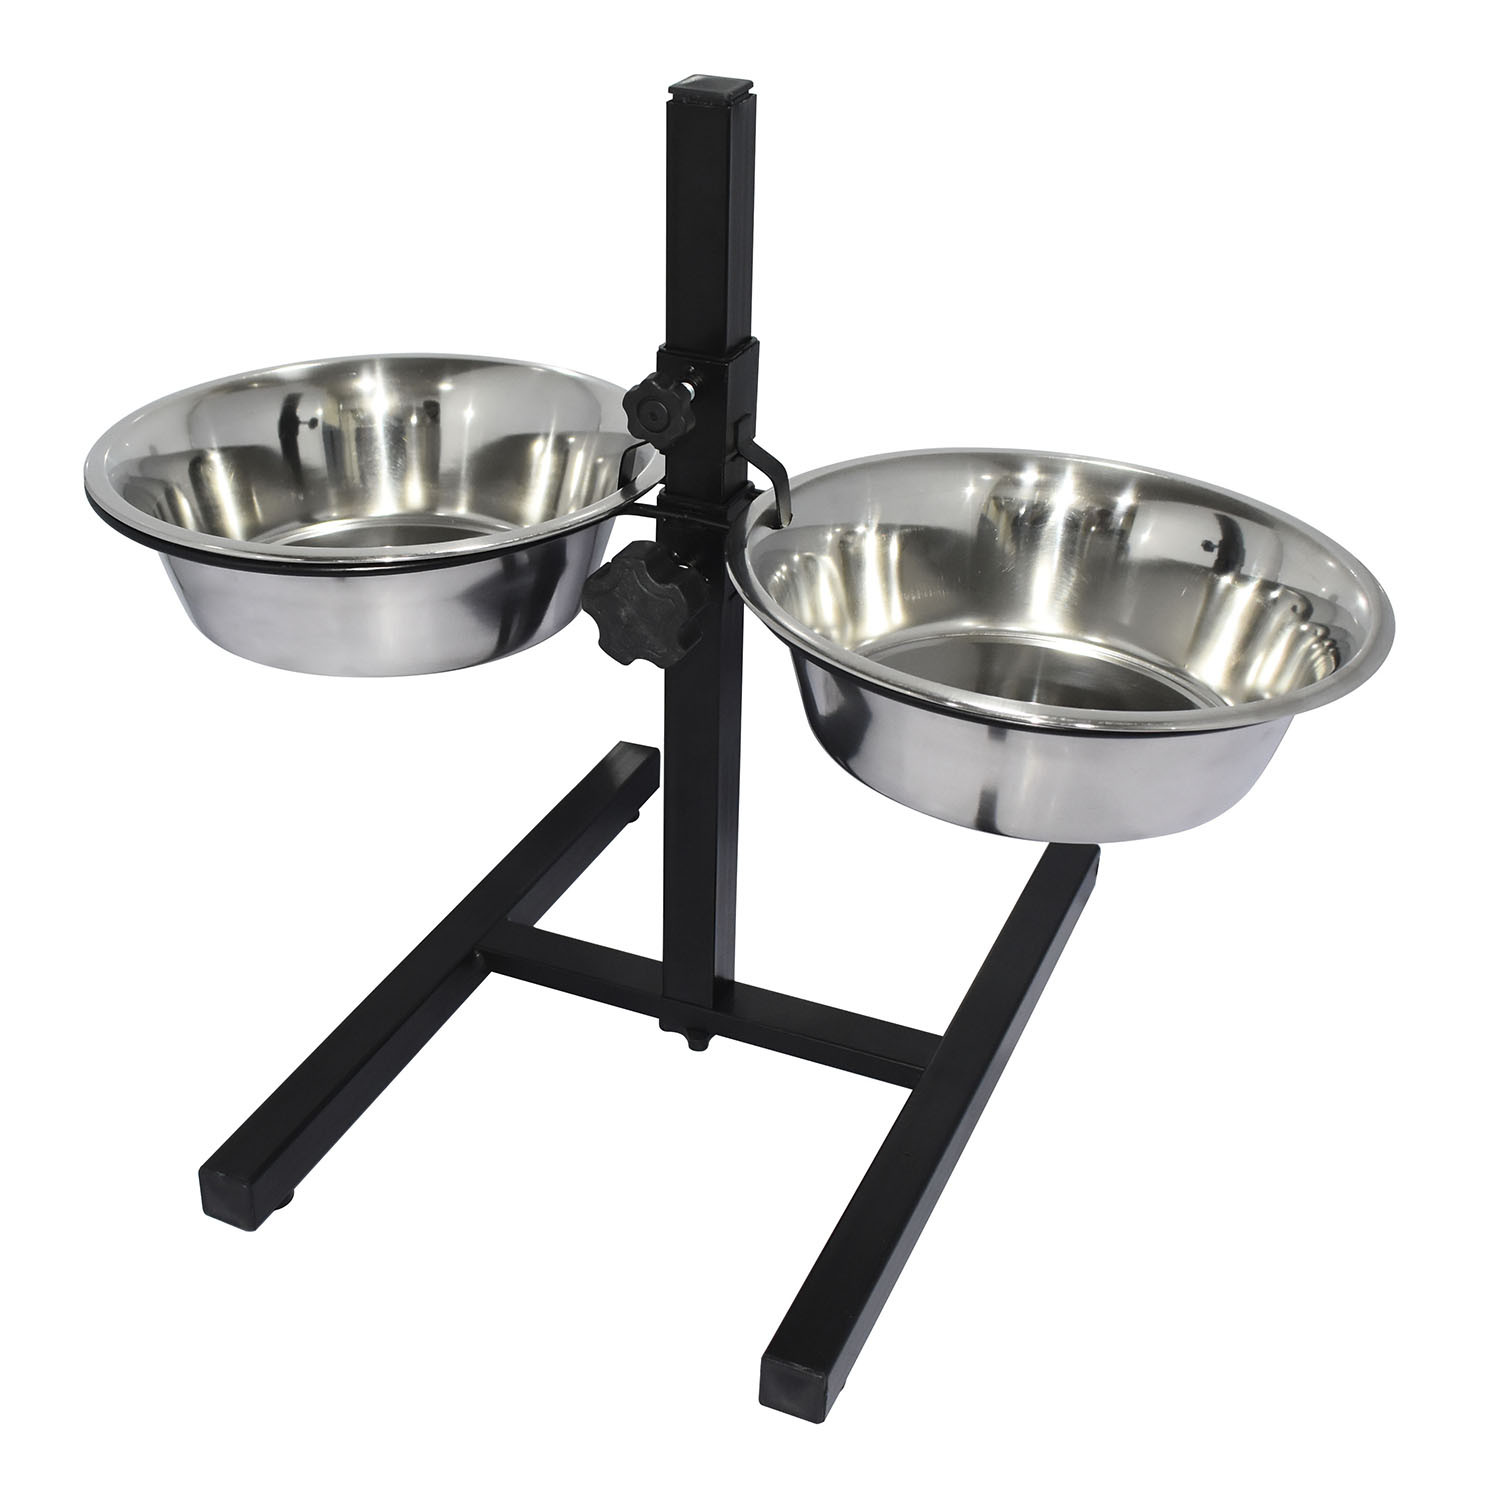 Clever Paws 2 Stainless Steel Bowl Set Image 2